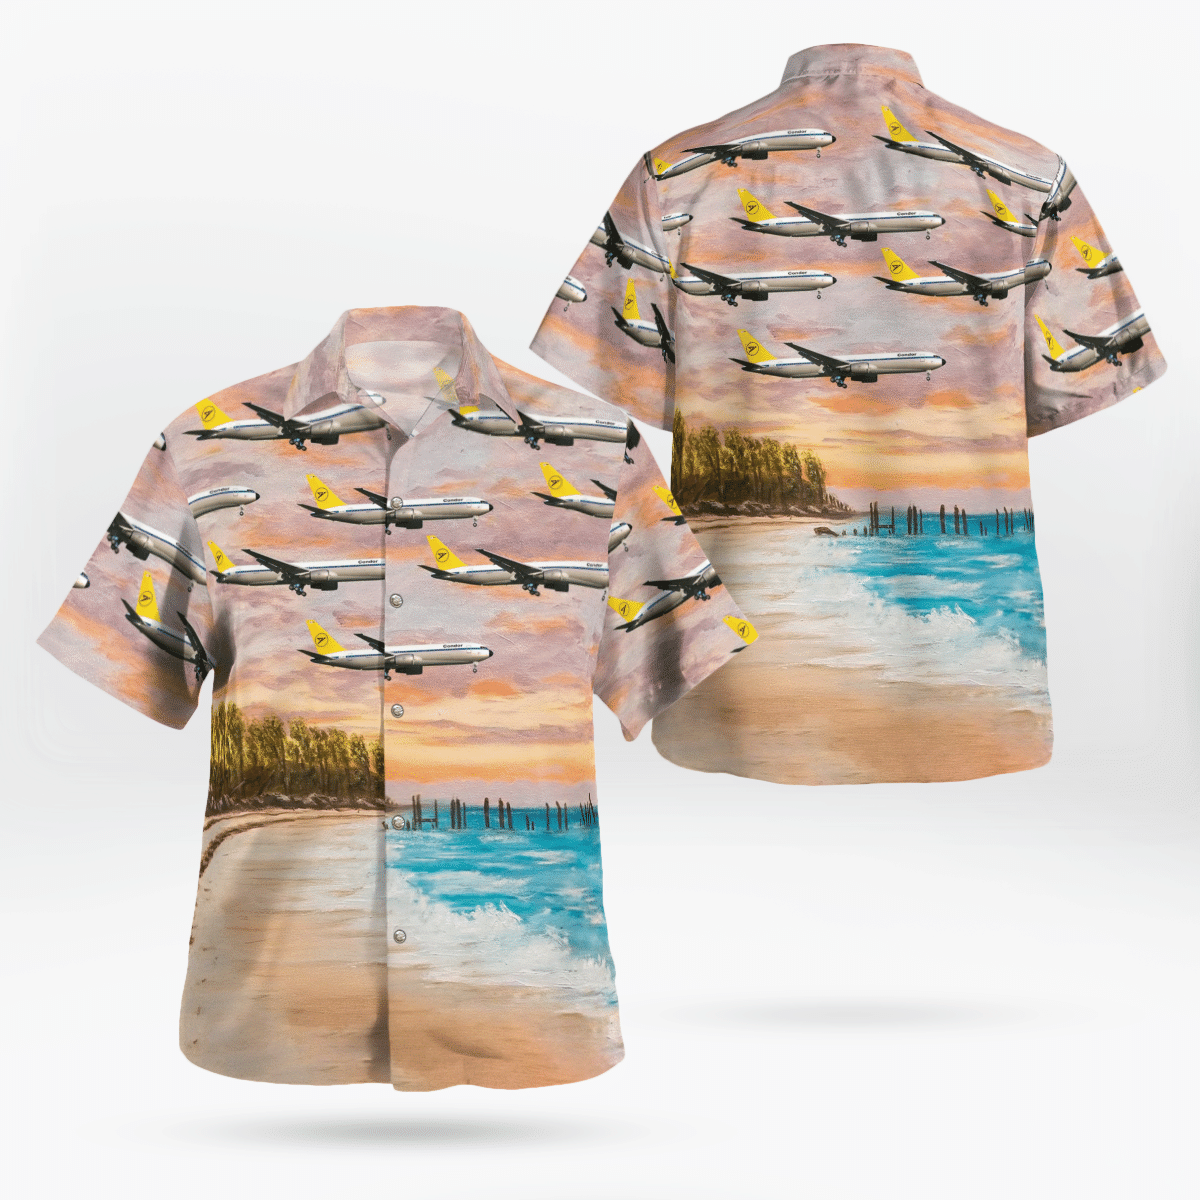 If you want to be noticed, wear These Trendy Hawaiian Shirt 137